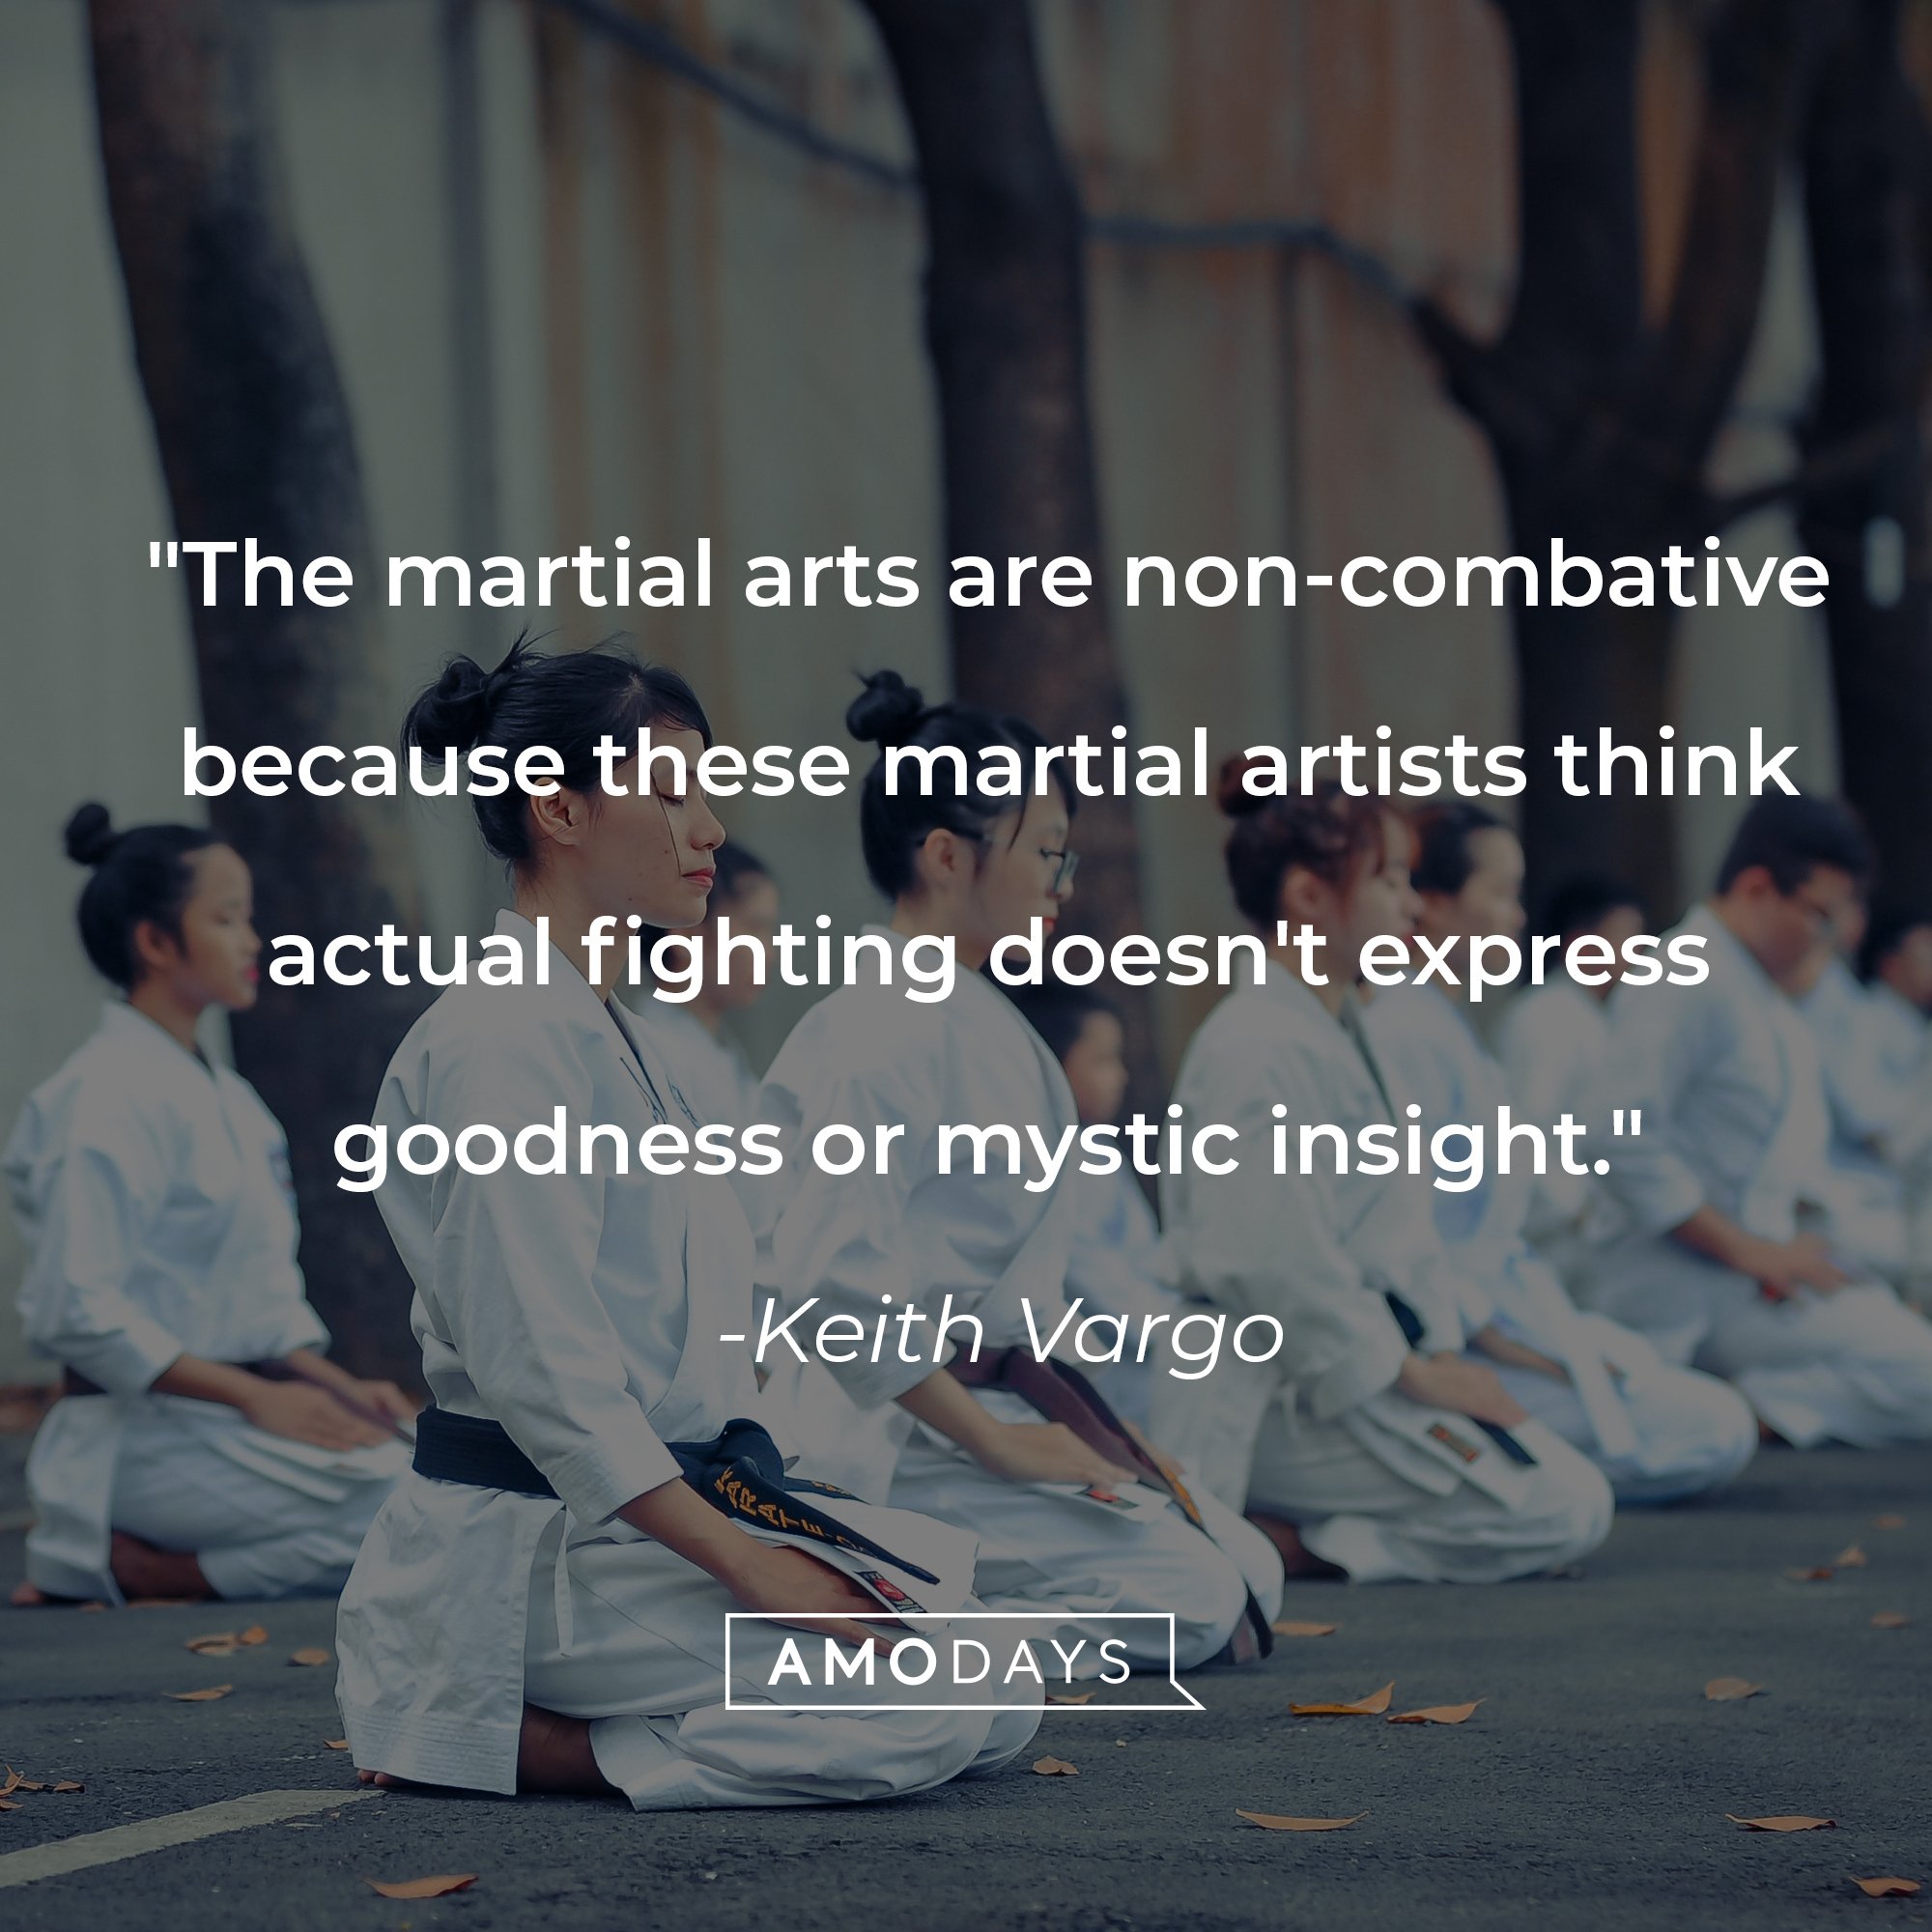 Keith Vargo’s quote: "The martial arts are non-combative because these martial artists think actual fighting doesn't express goodness or mystic insight." | Image: AmoDays   